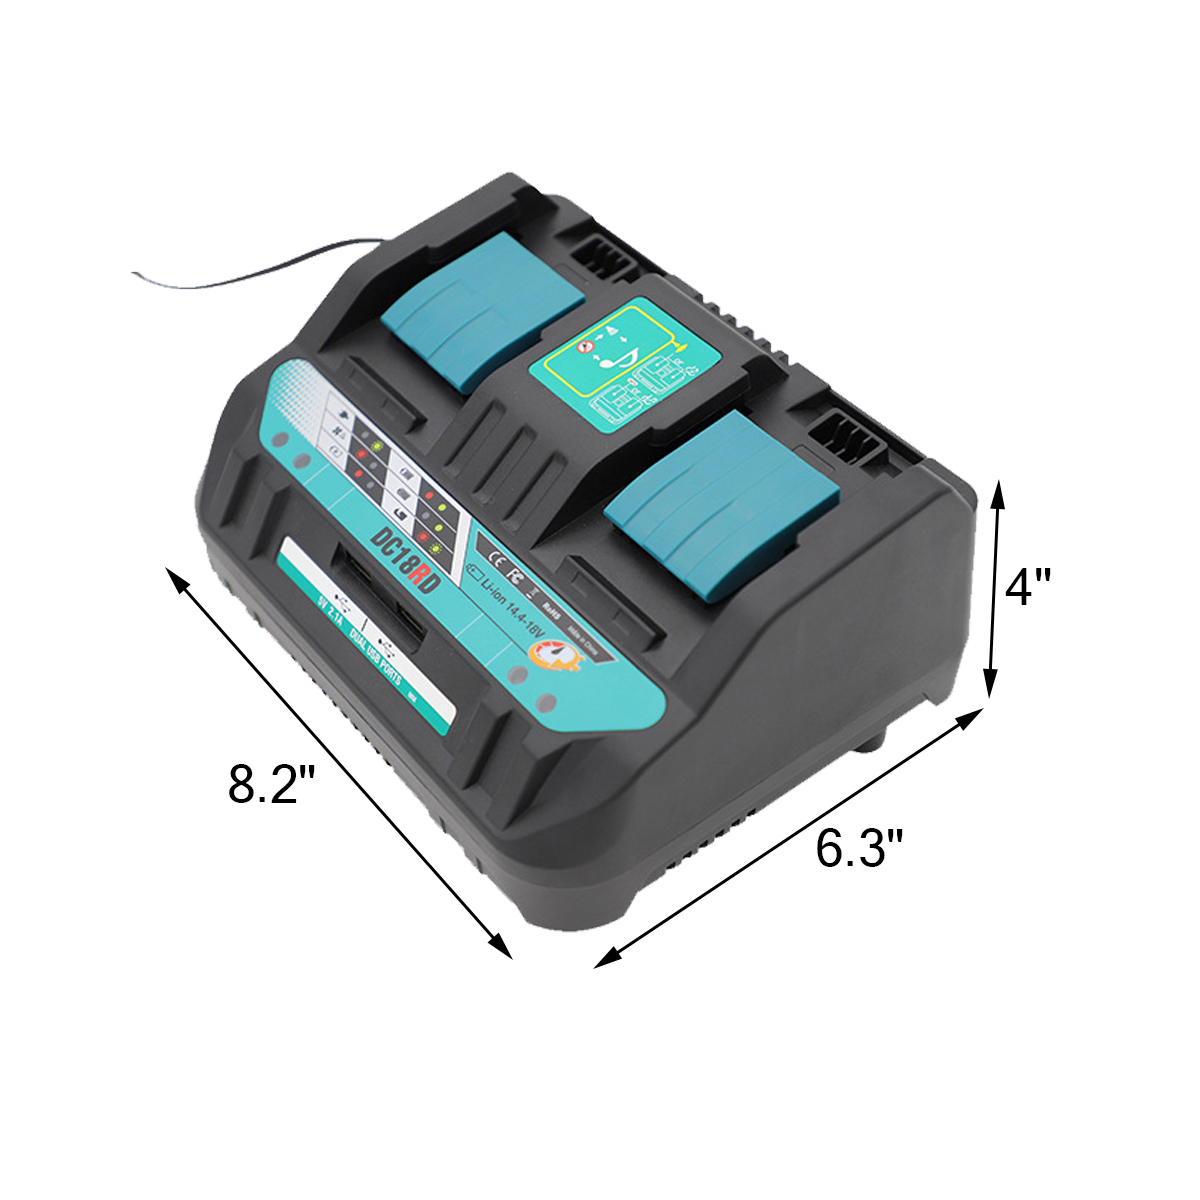 For Makita Replacement DC18RD Dual Port 14.4-18V Rapid Battery Charger 2 USB USA